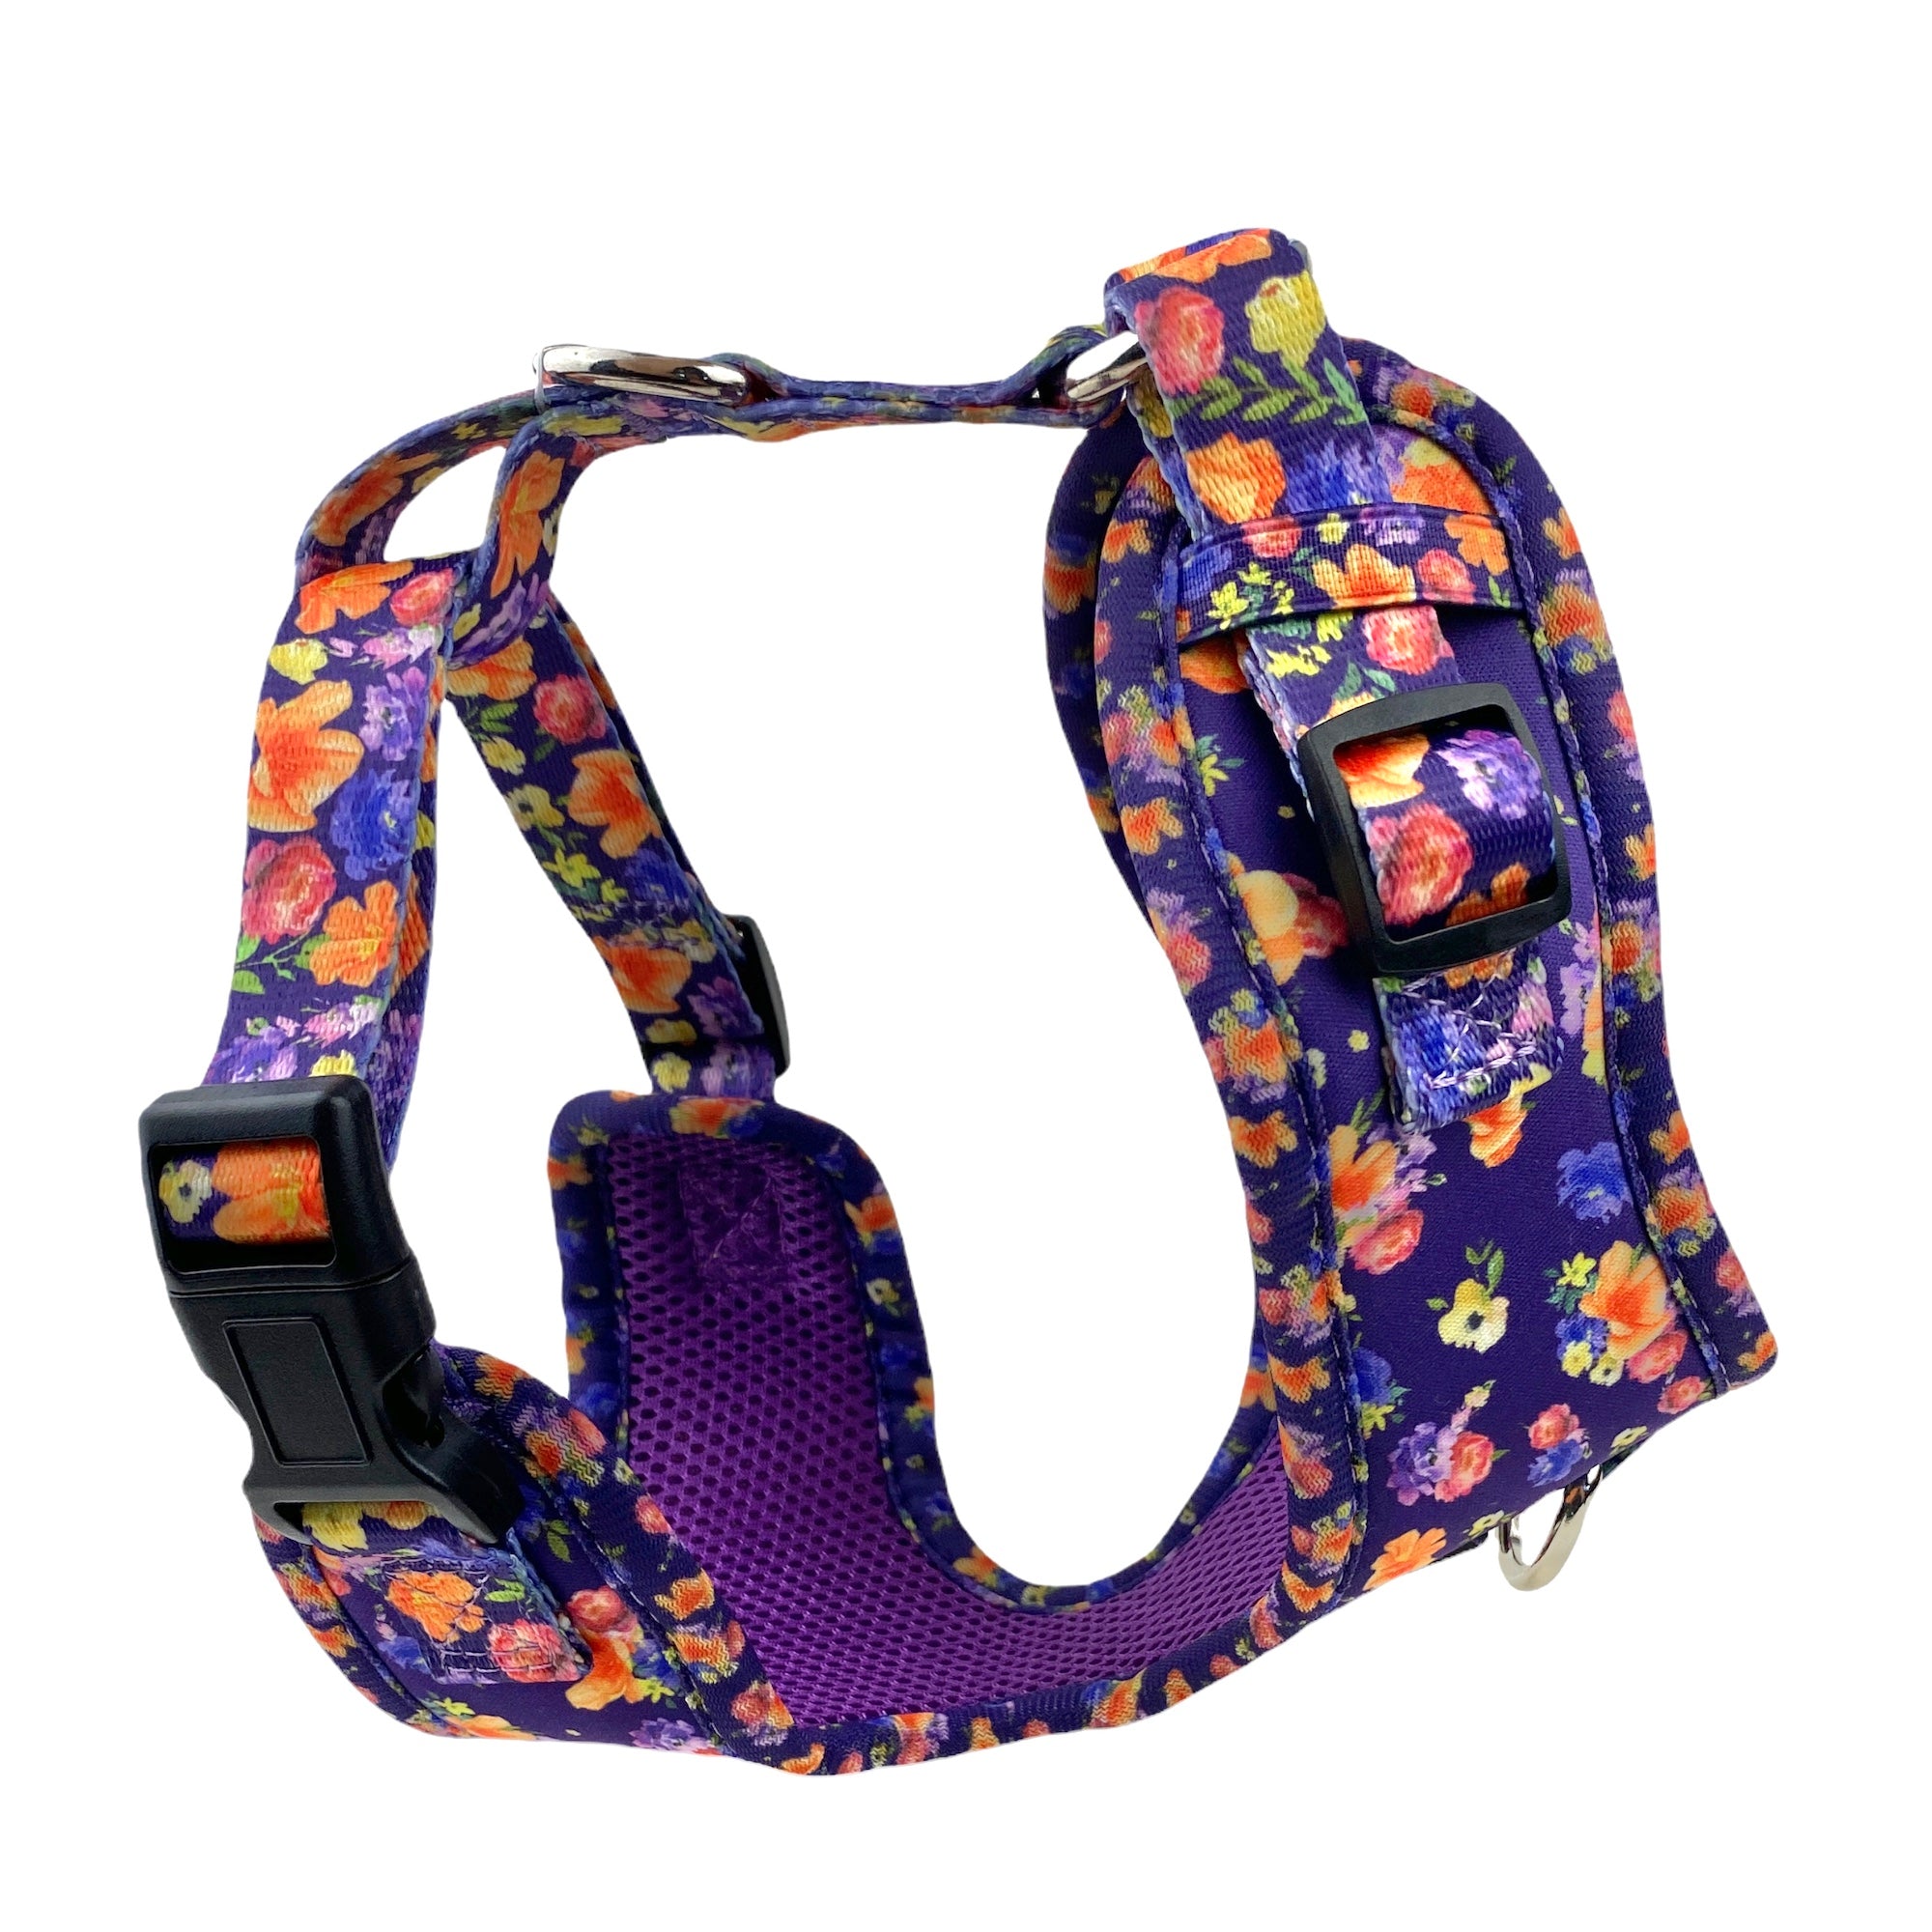 a photo of a 3D image of a purple floral dog harness designed to be escape proof and no pull dog harness for small and medium dogs by fearless pet